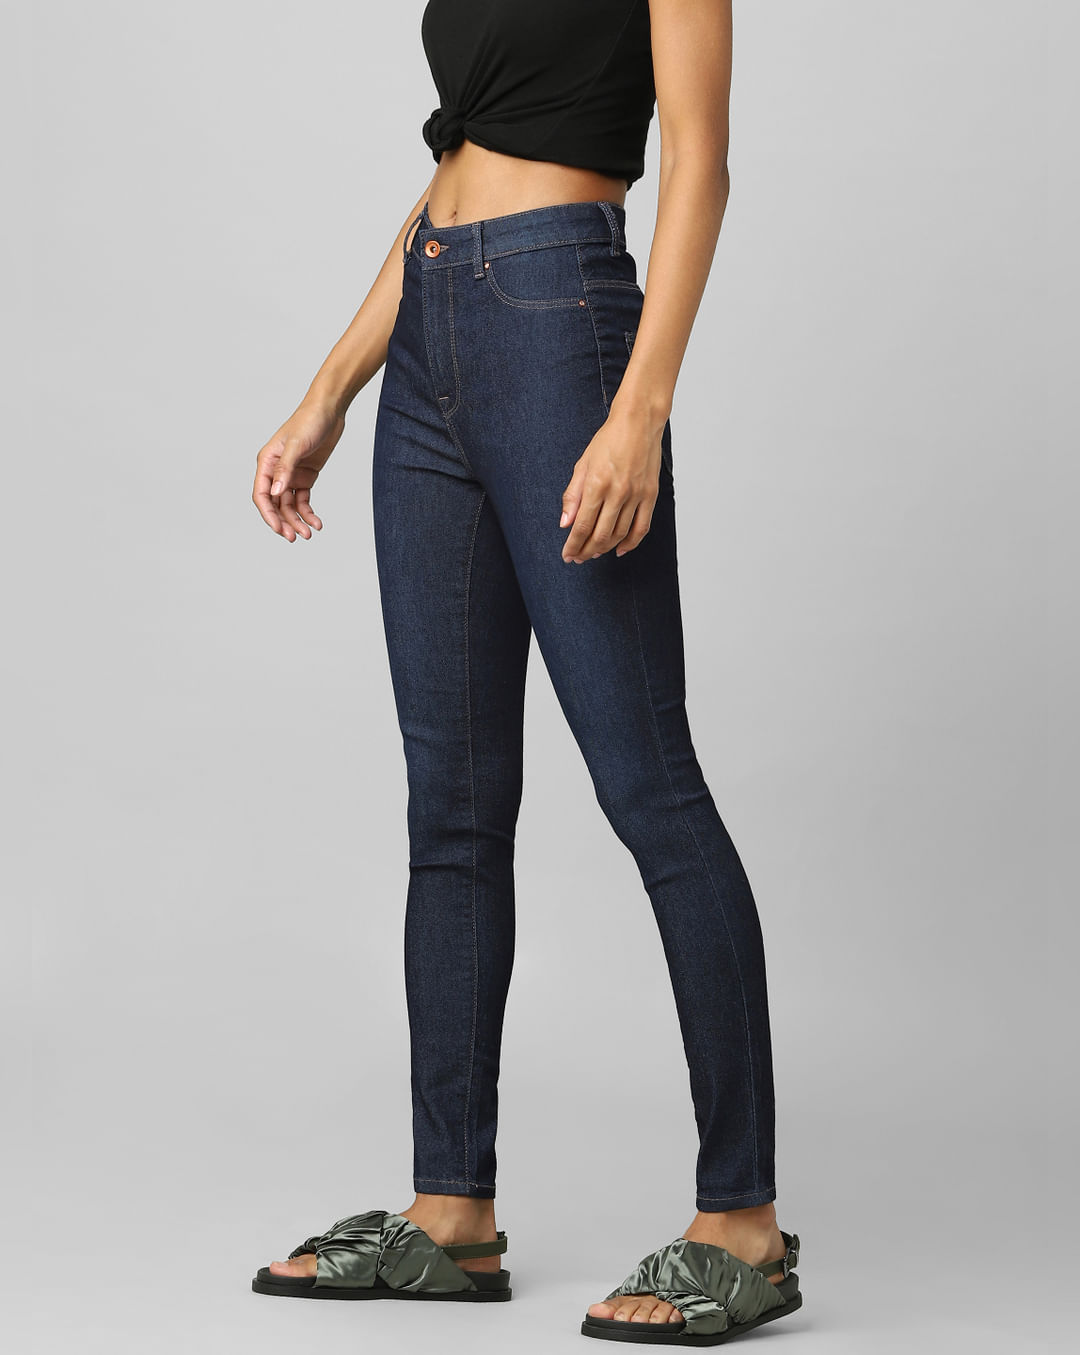 High Waisted Jeans Outfit Dark Blue New Look Stretch Skinny Jeans